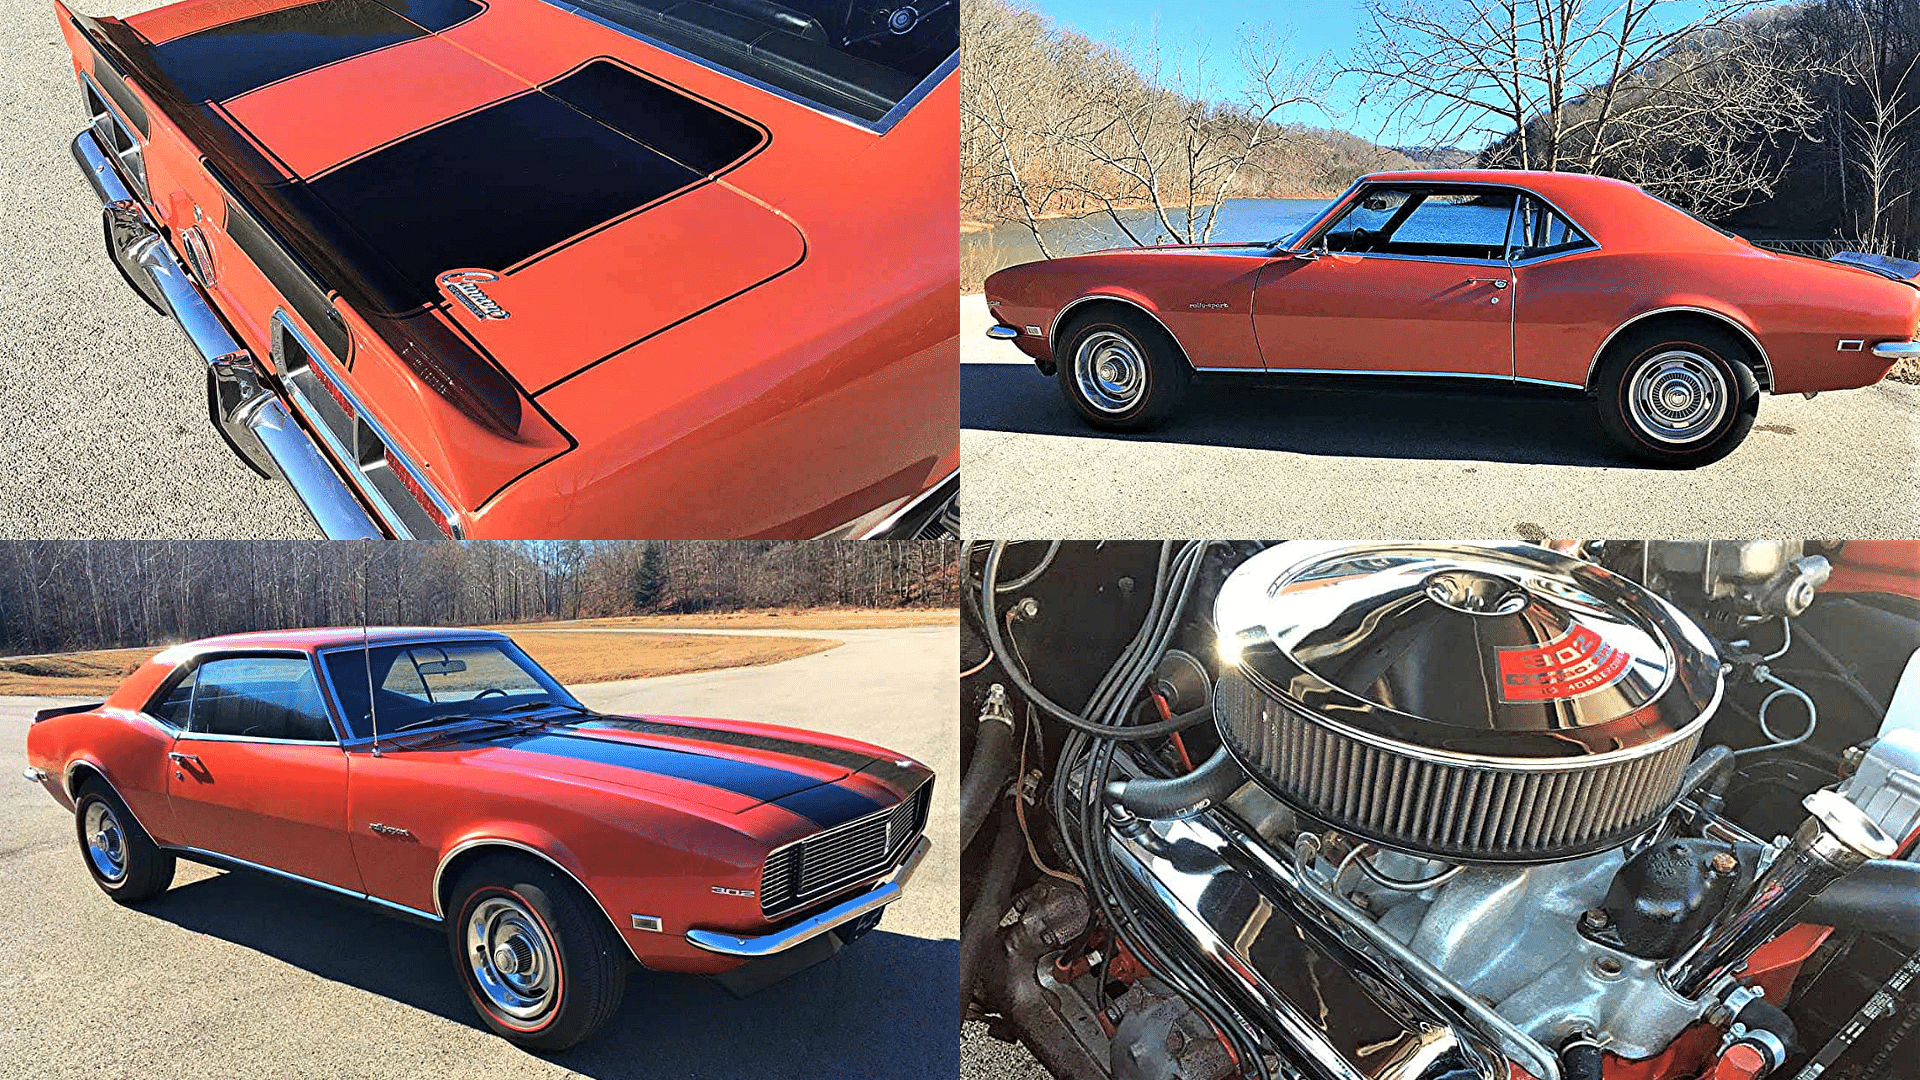 1969 Chevrolet Camaro in Orange exterior, engine, rear view, side view, front-side view